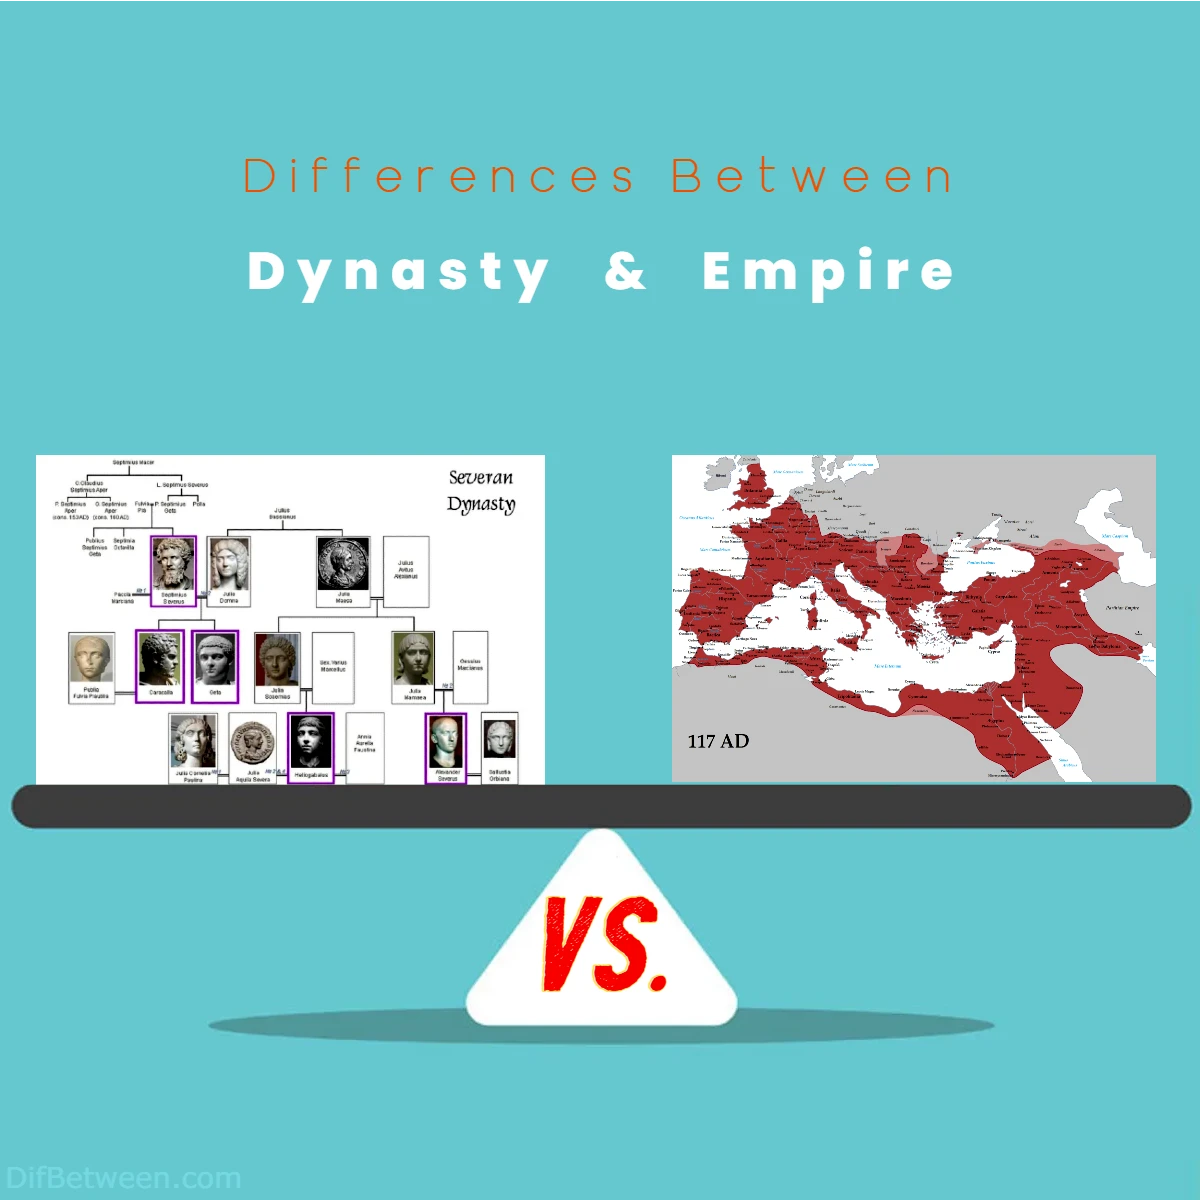 Differences Between Dynasty vs Empire